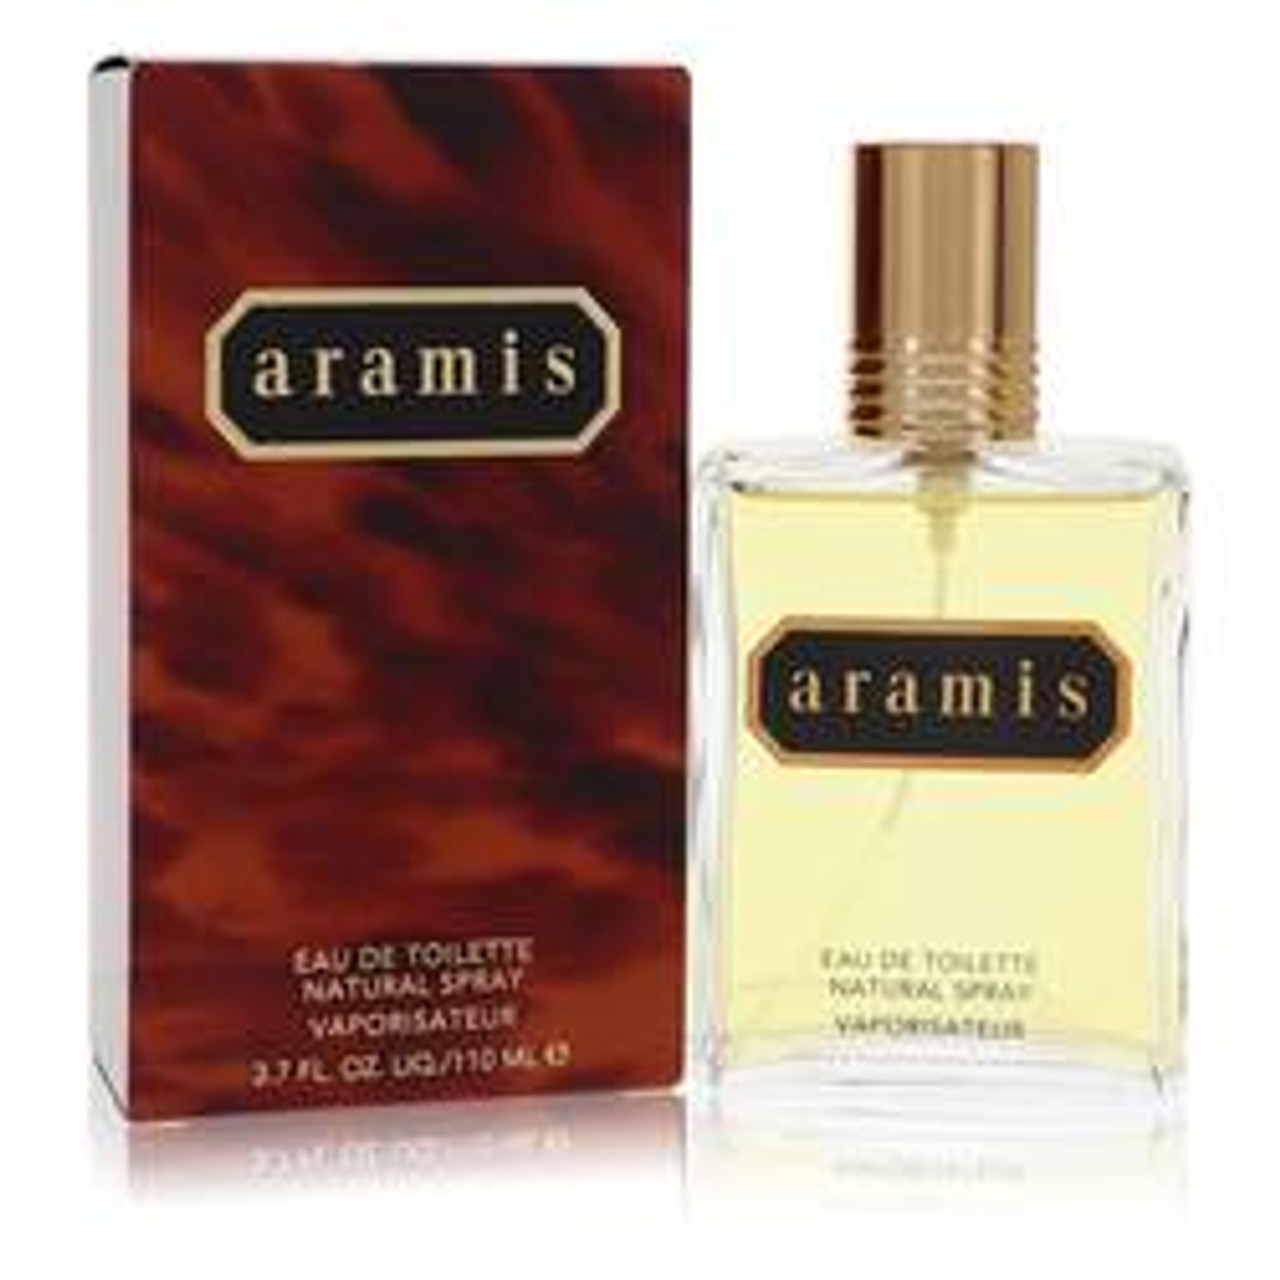 Aramis Cologne By Aramis Cologne / Eau De Toilette Spray 3.7 oz for Men - [From 83.00 - Choose pk Qty ] - *Ships from Miami